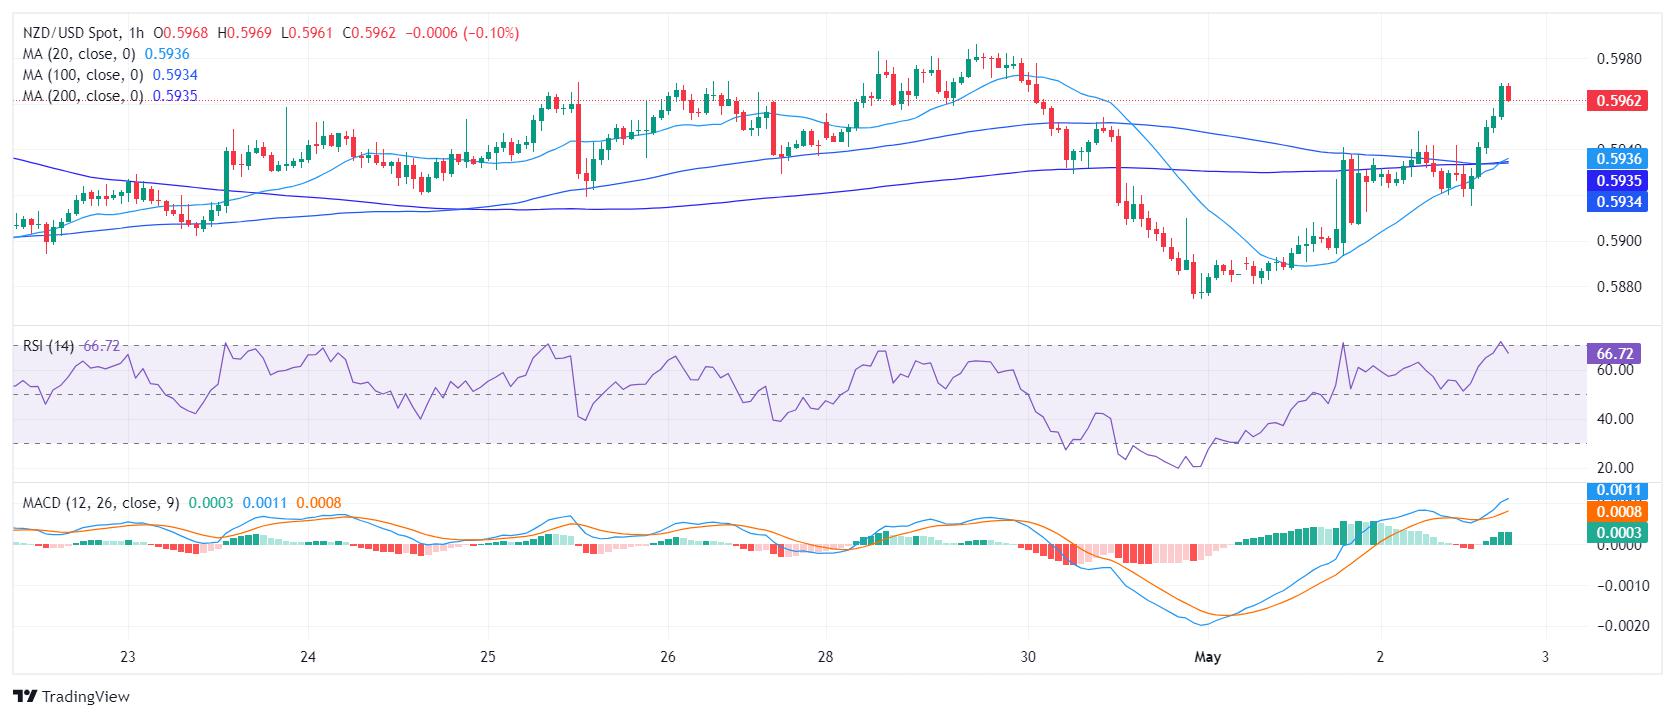 NZD/USD Price Analysis: Short-term uptrend hinted, buyers might take some profits